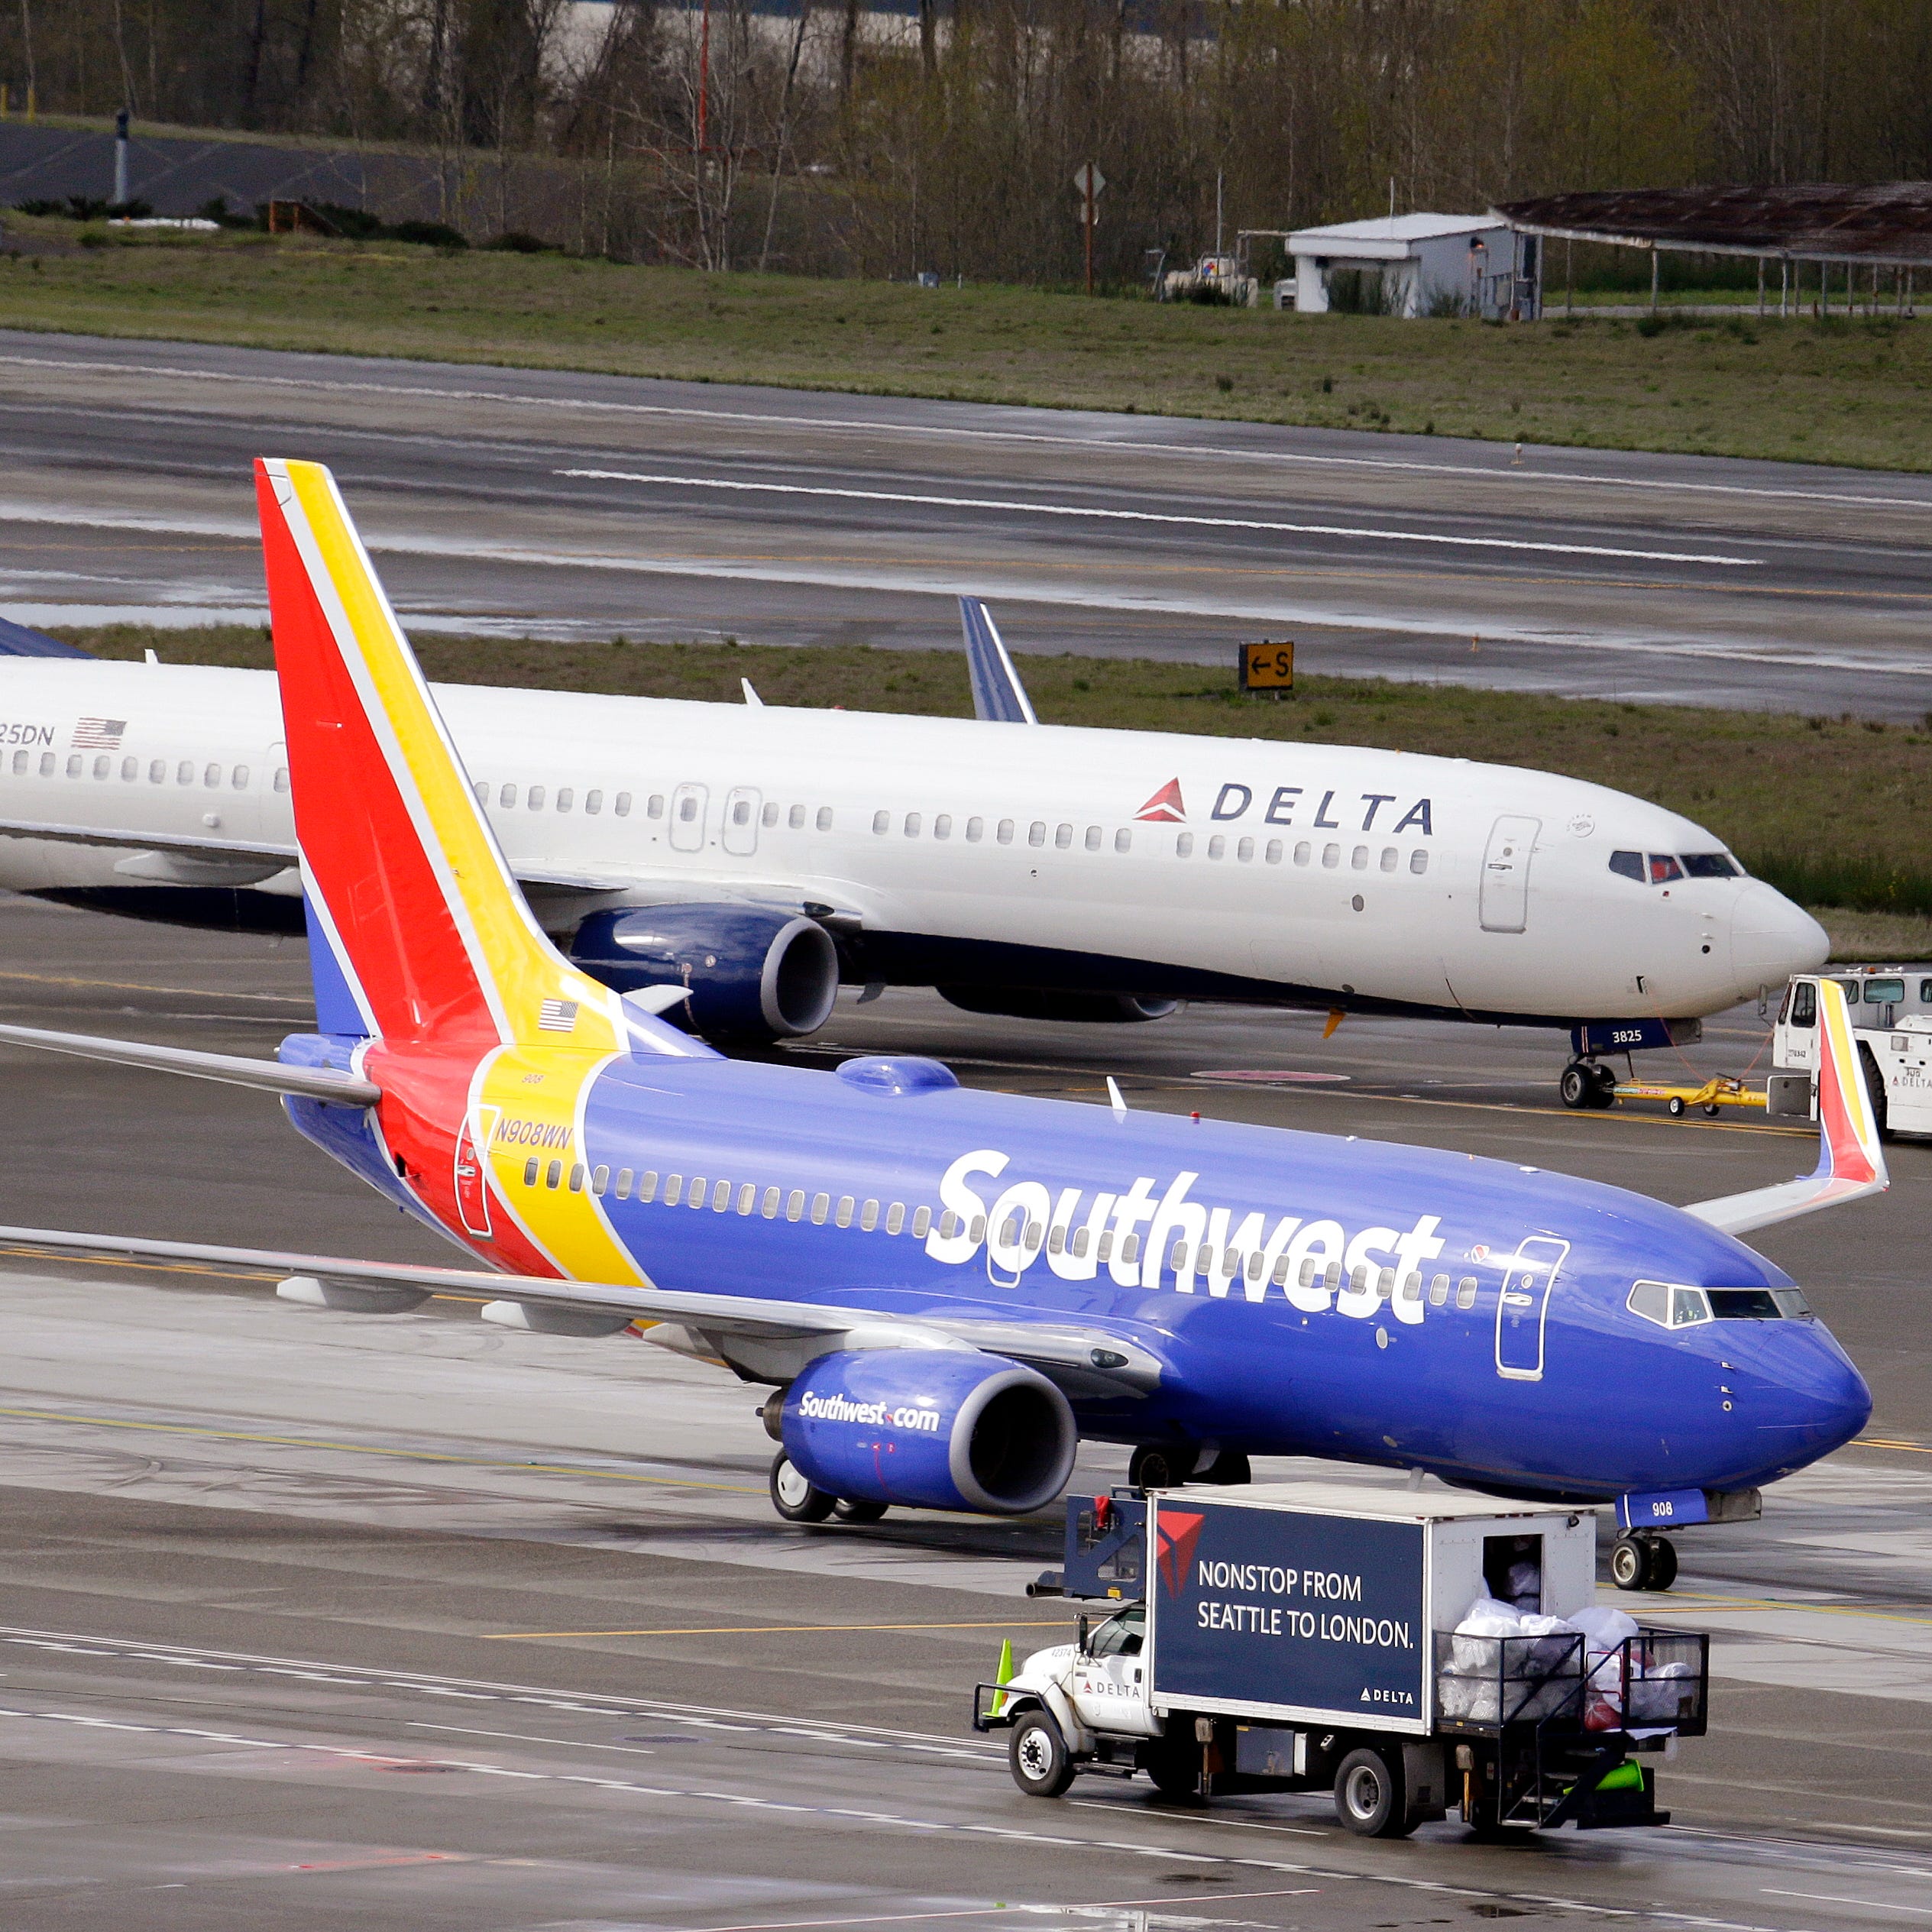 In this photo taken Tuesday, March 24, 2015, a Delta jet is pulled past a Southwest plane at Seattle-Tacoma International Airport in SeaTac, Wash. (AP Photo/Elaine Thompson)